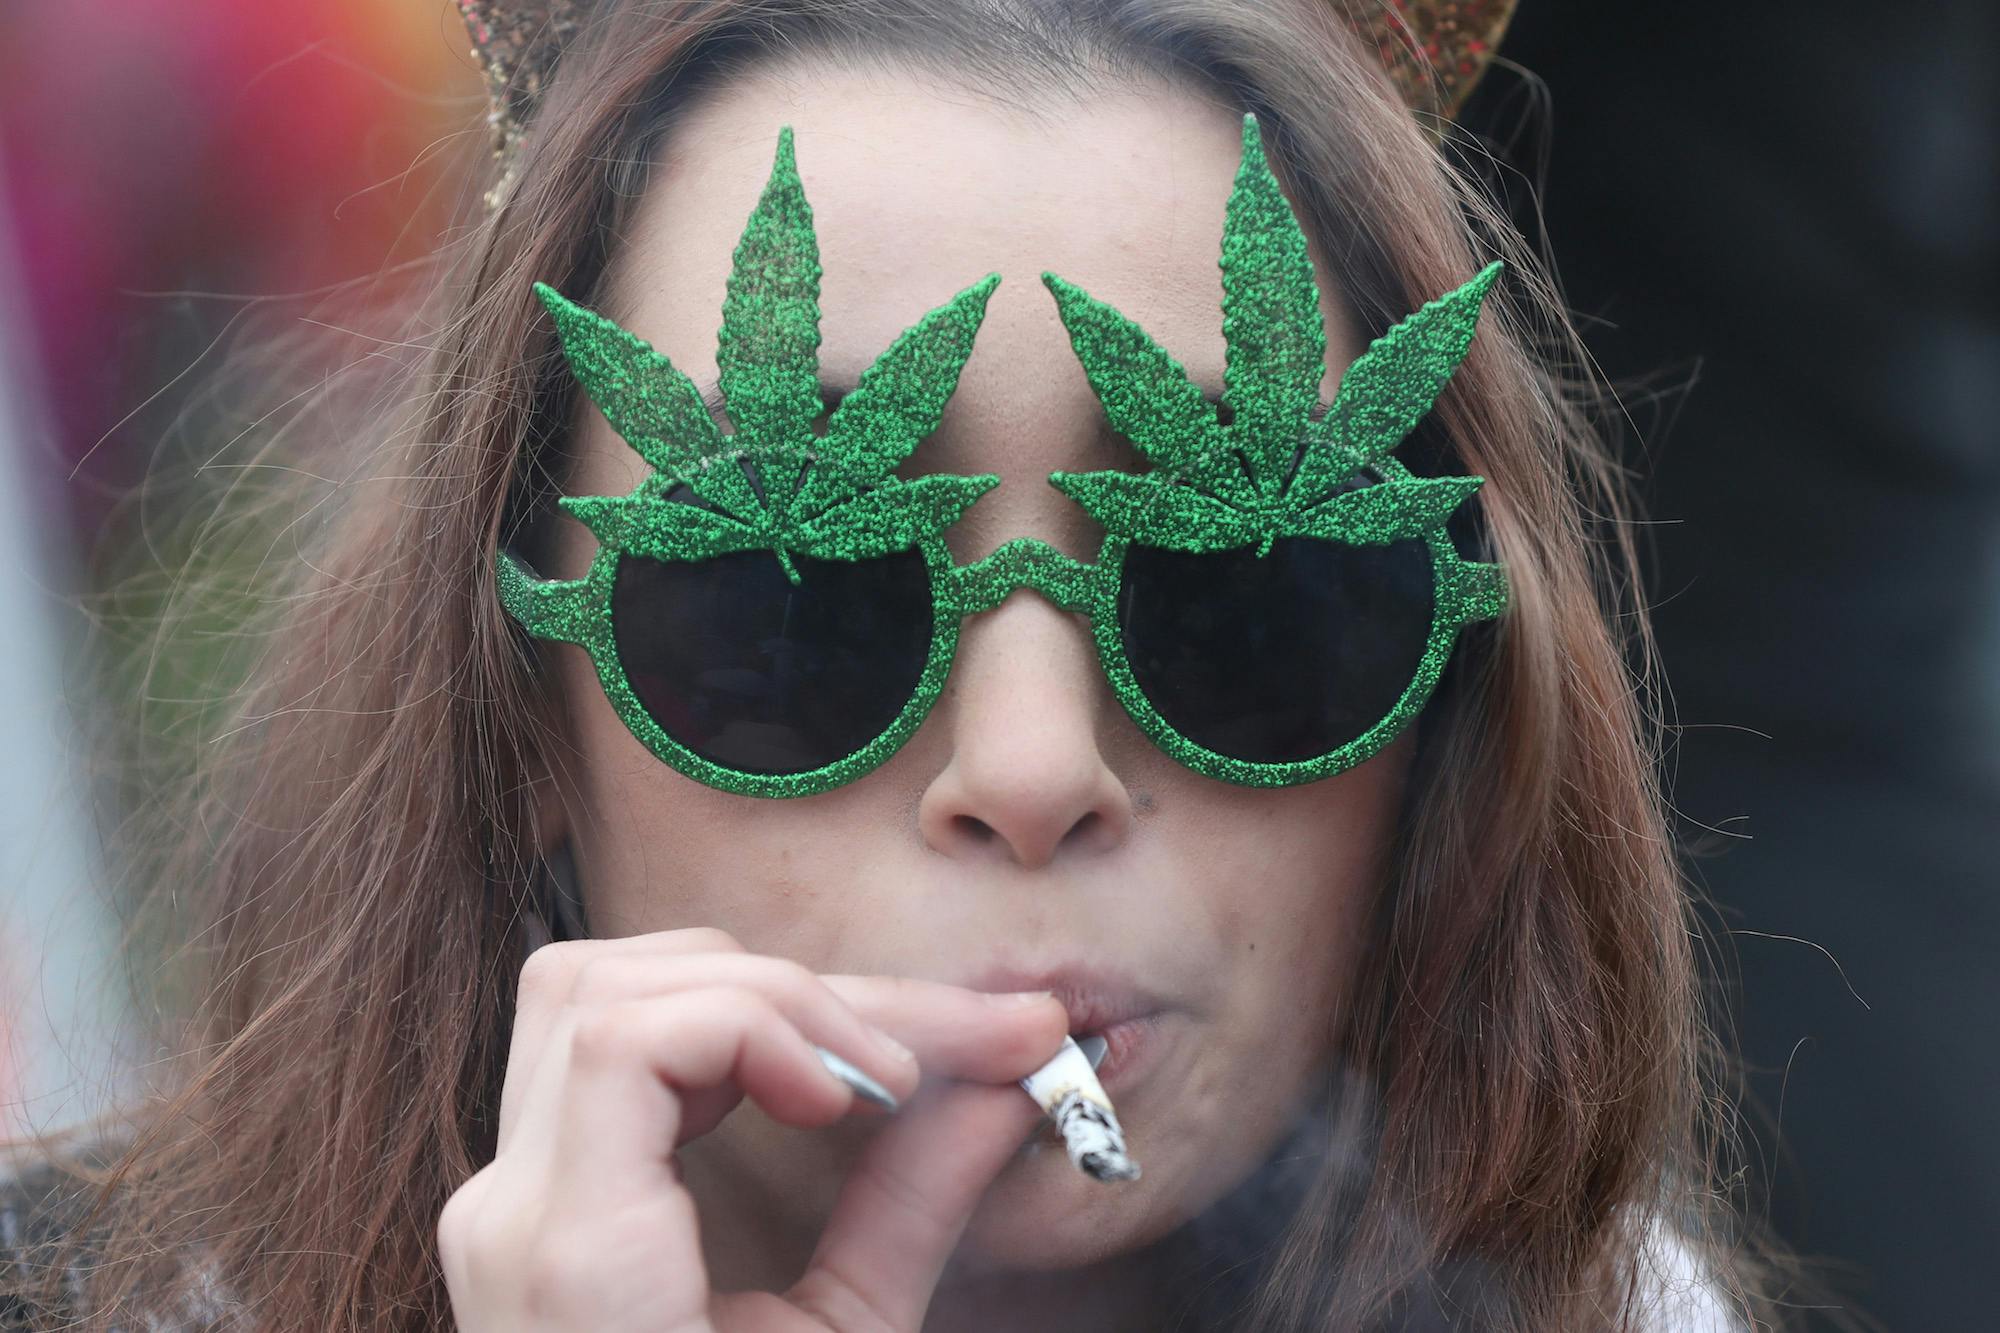 New Brunswick wants to force marijuana users to lock up their weed at home